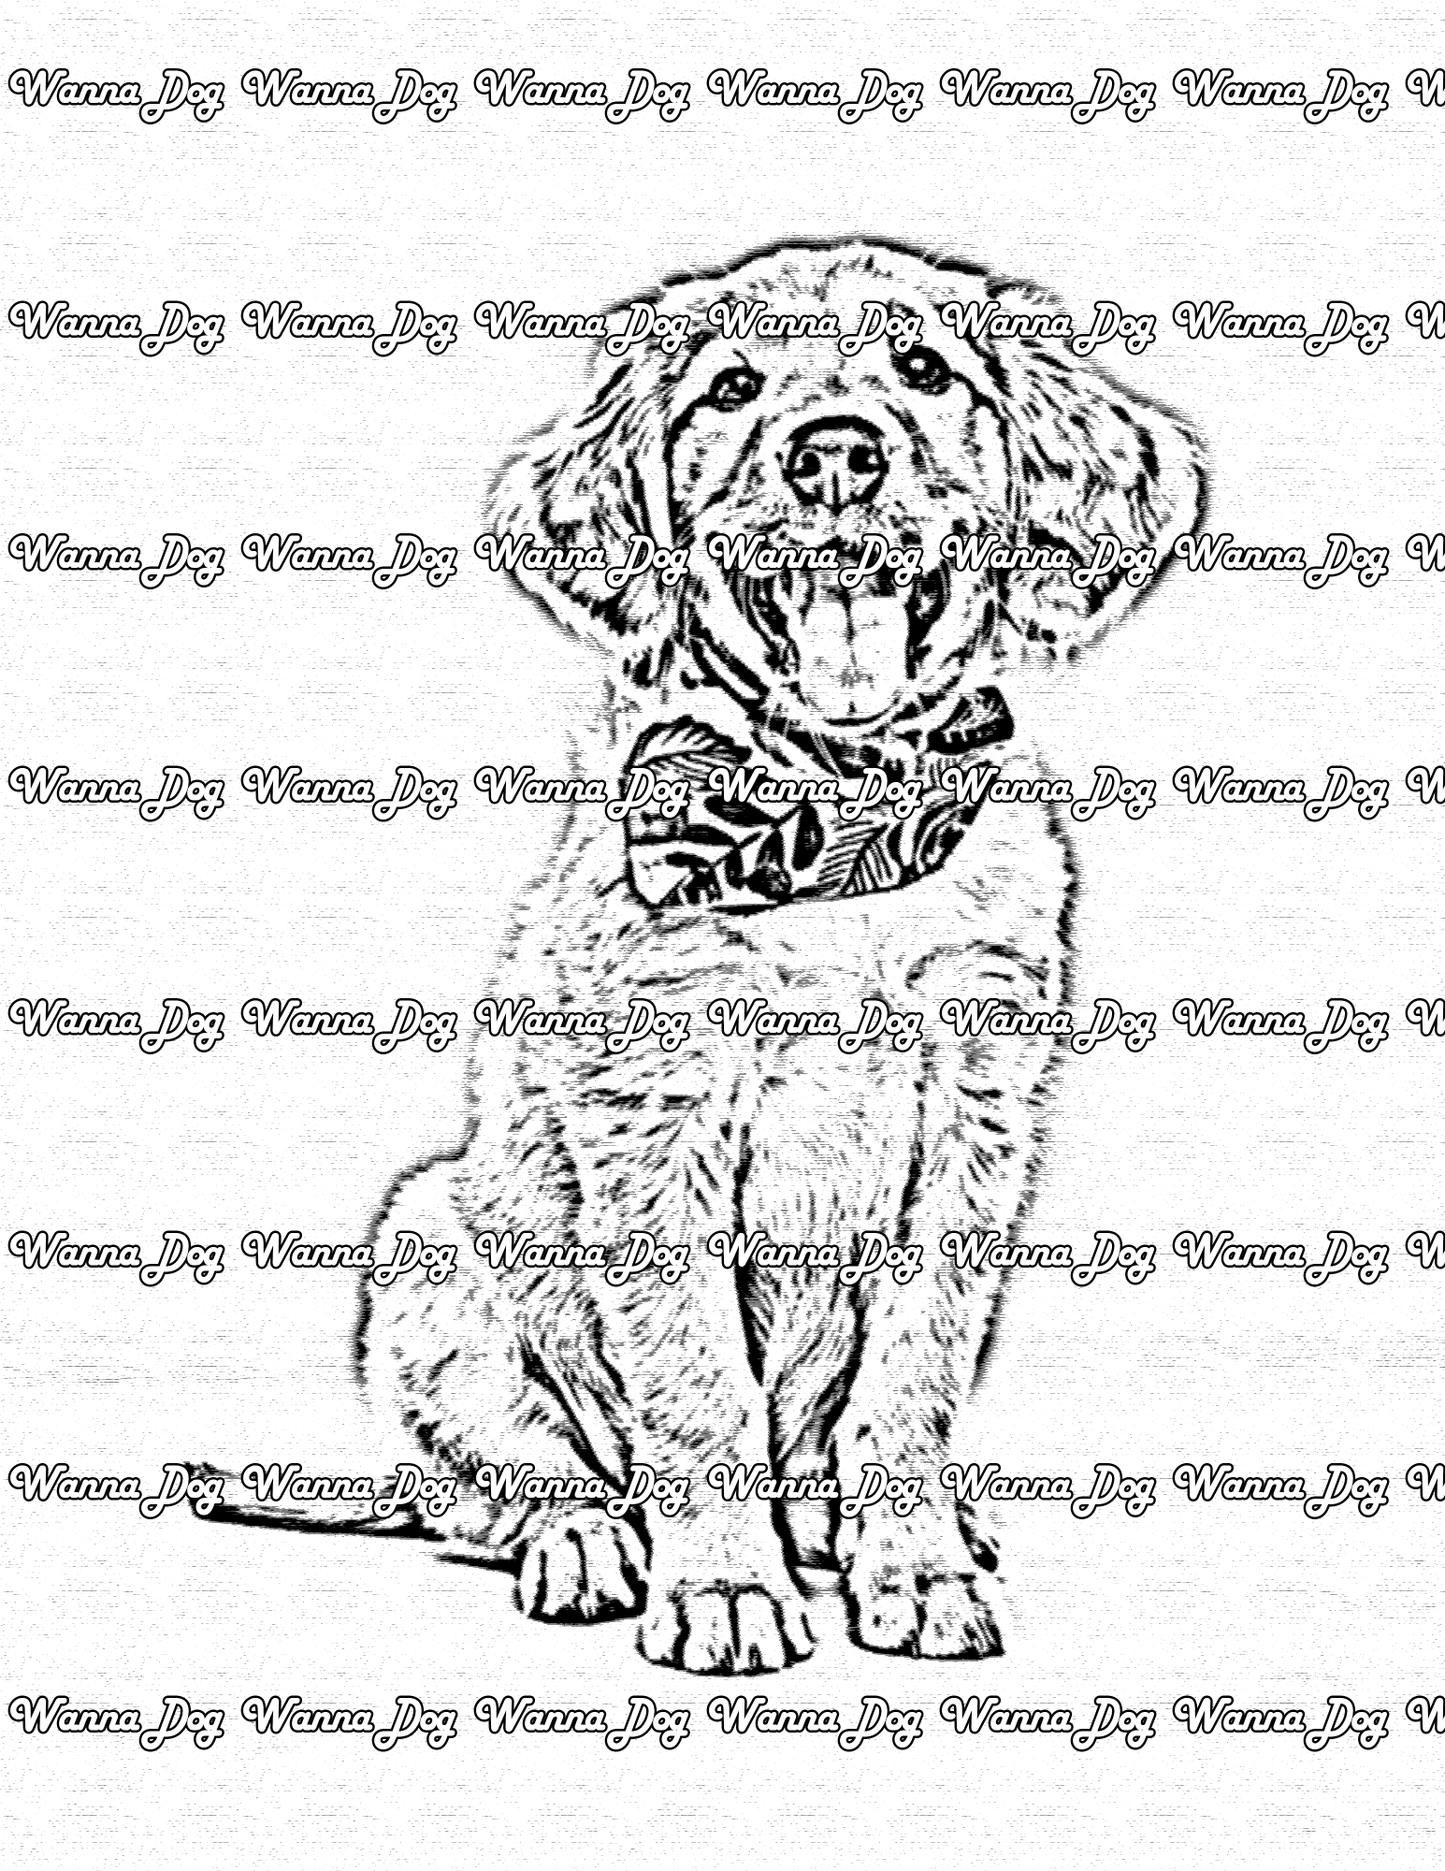 Golden Retriever Puppy Coloring Page of a Golden Retriever Puppy wearing a bowtie and smiling